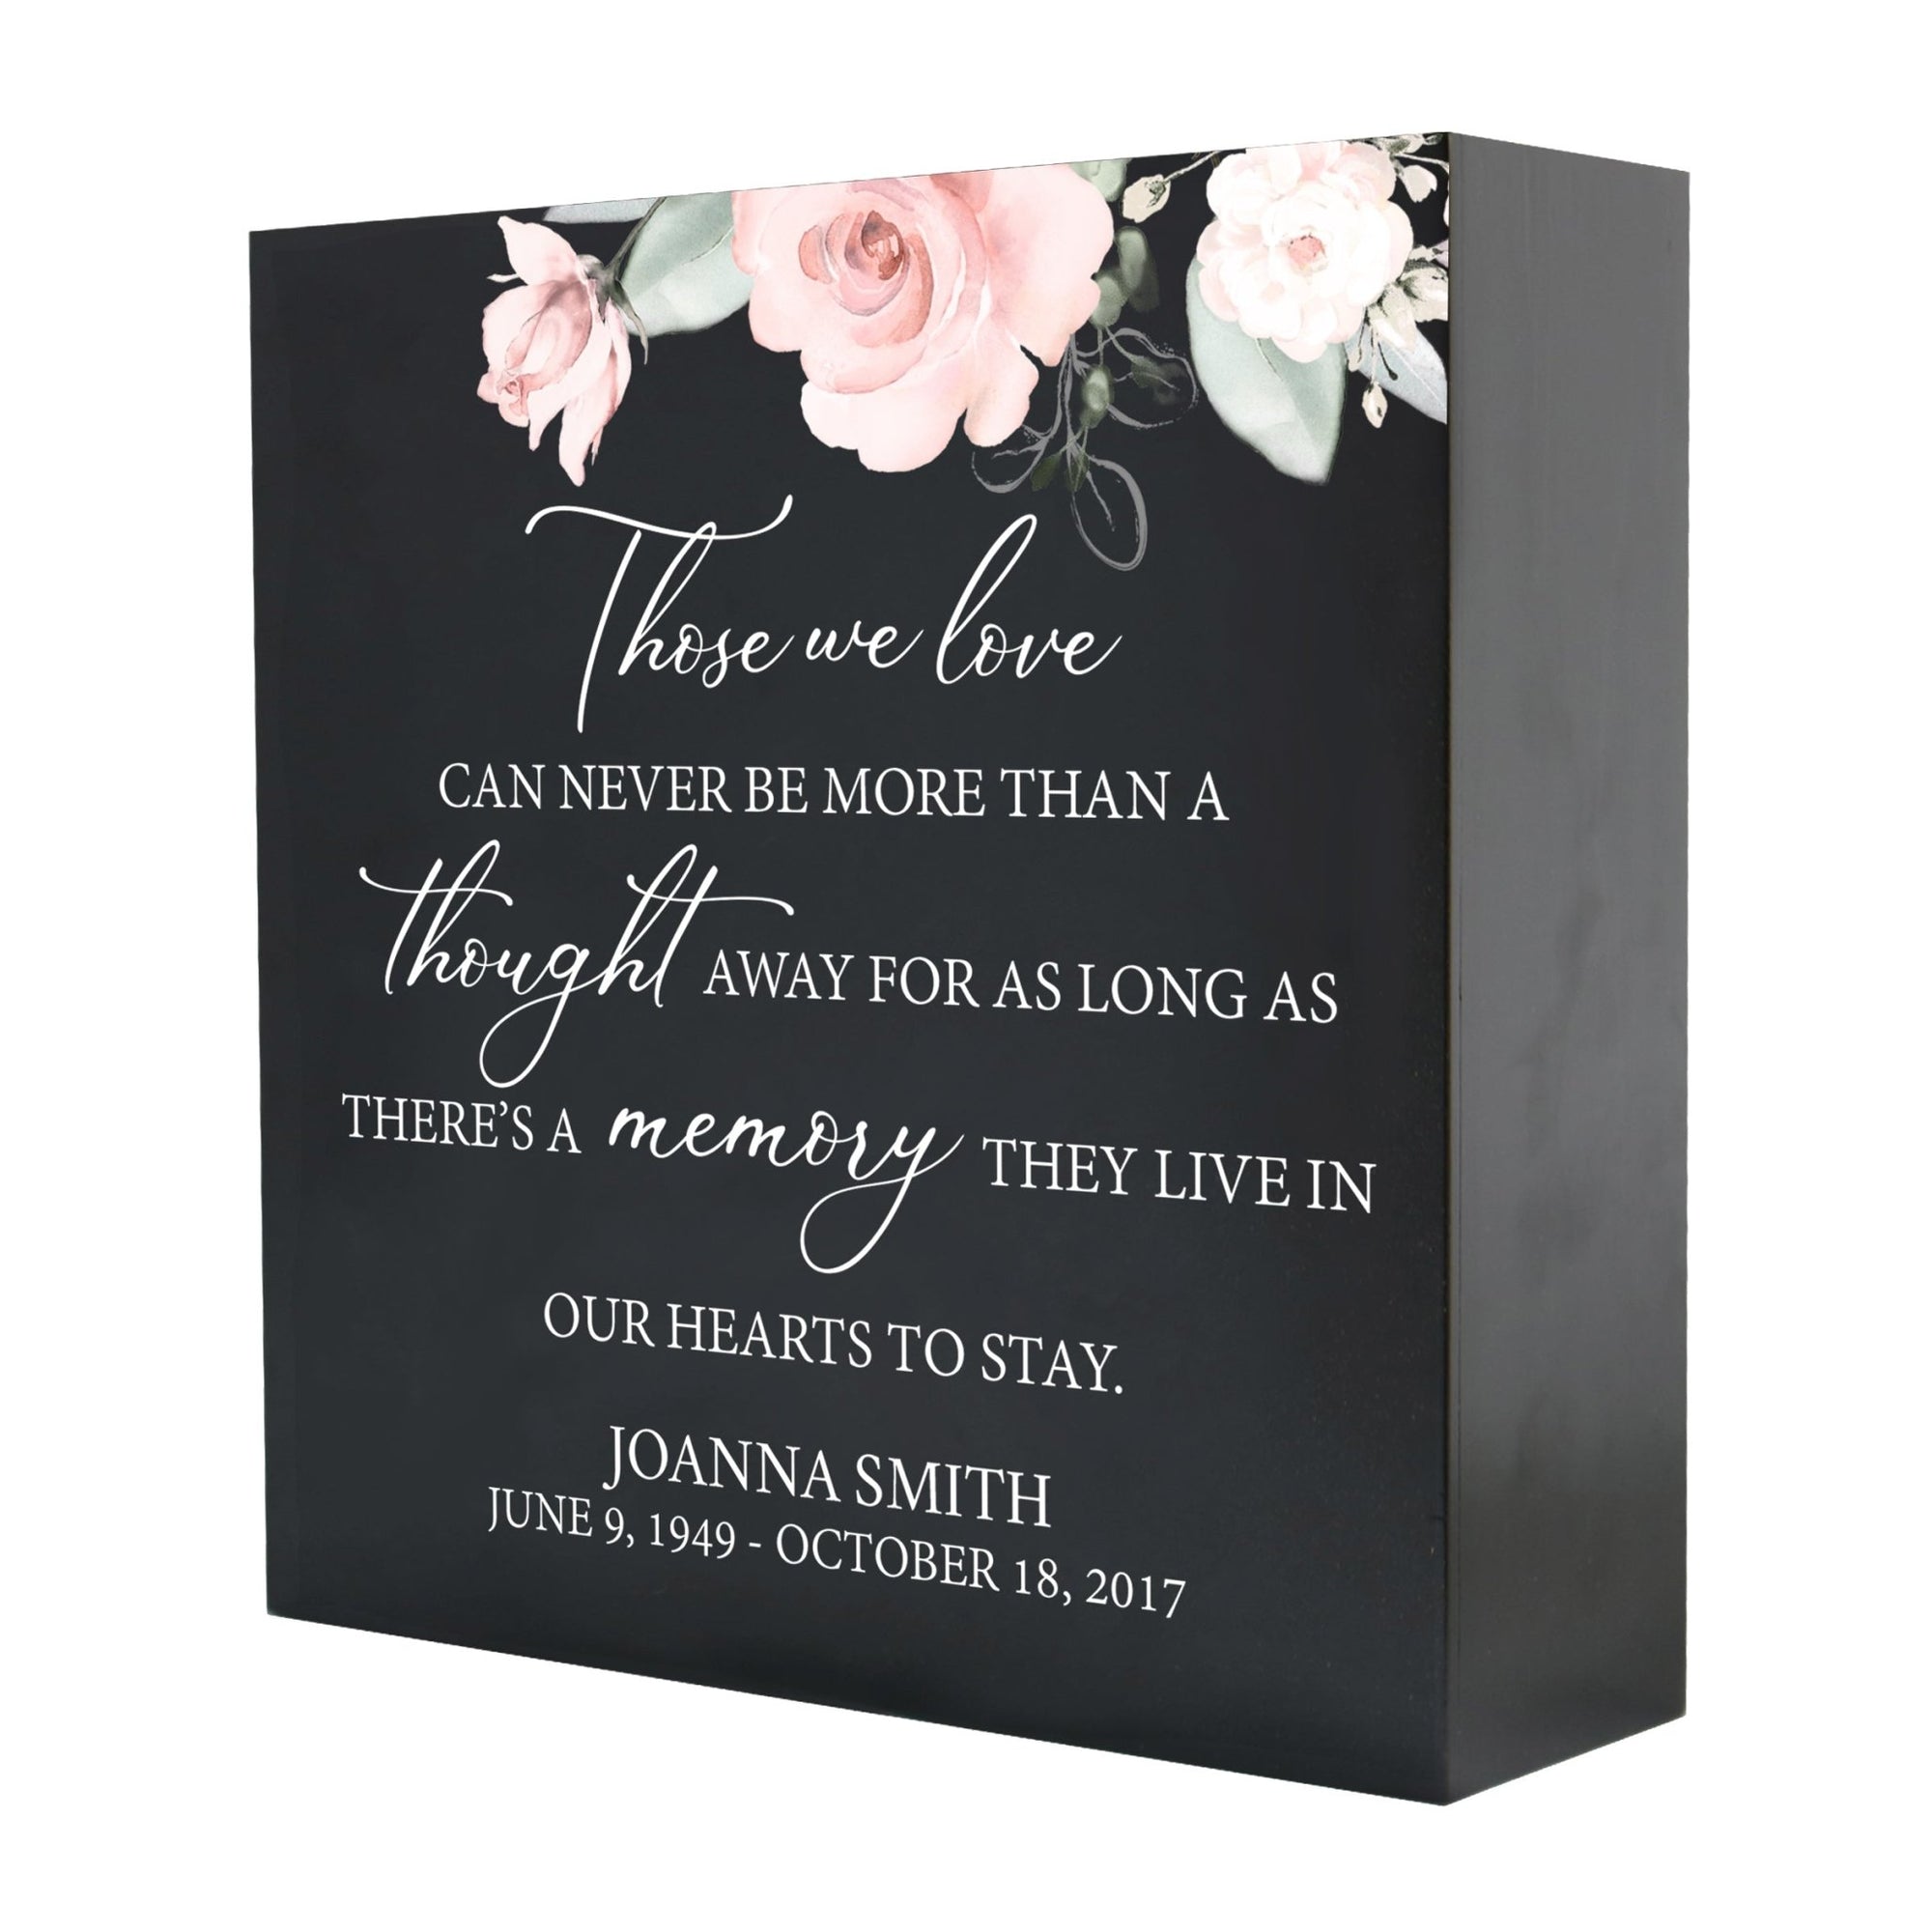 Personalized Modern Inspirational Memorial Wooden Shadow Box and Urn 10x10 holds 189 cu in of Human Ashes - Those We Love (Black) - LifeSong Milestones